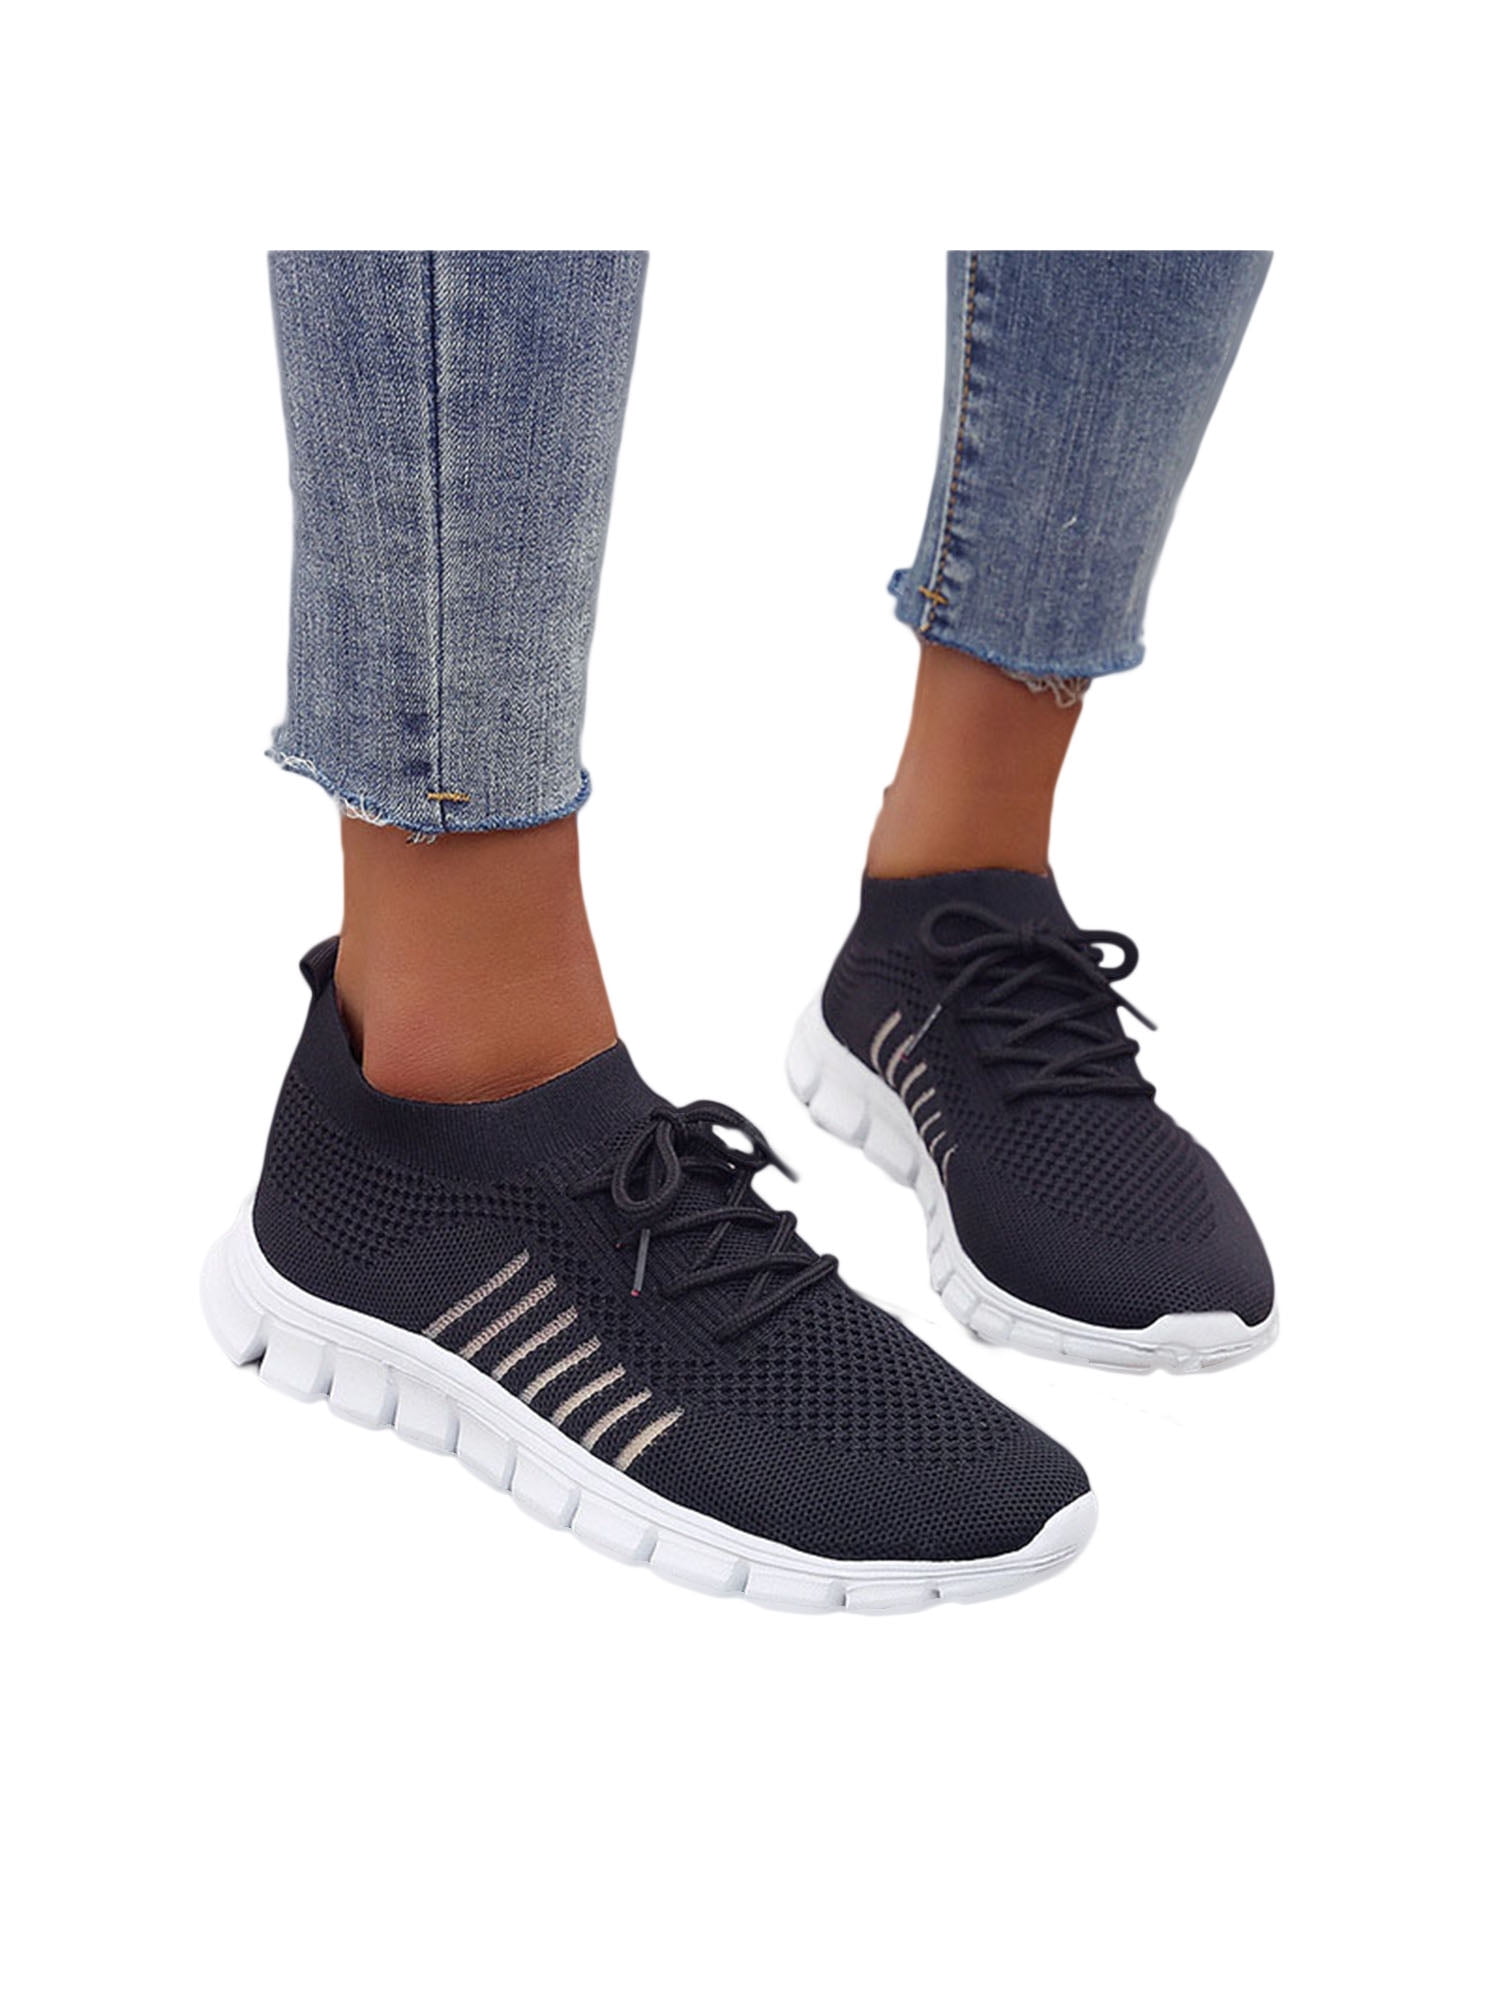 New Women Lace Up Comfy Running Sneakers Breathable Mesh Casual Athletic Shoes 